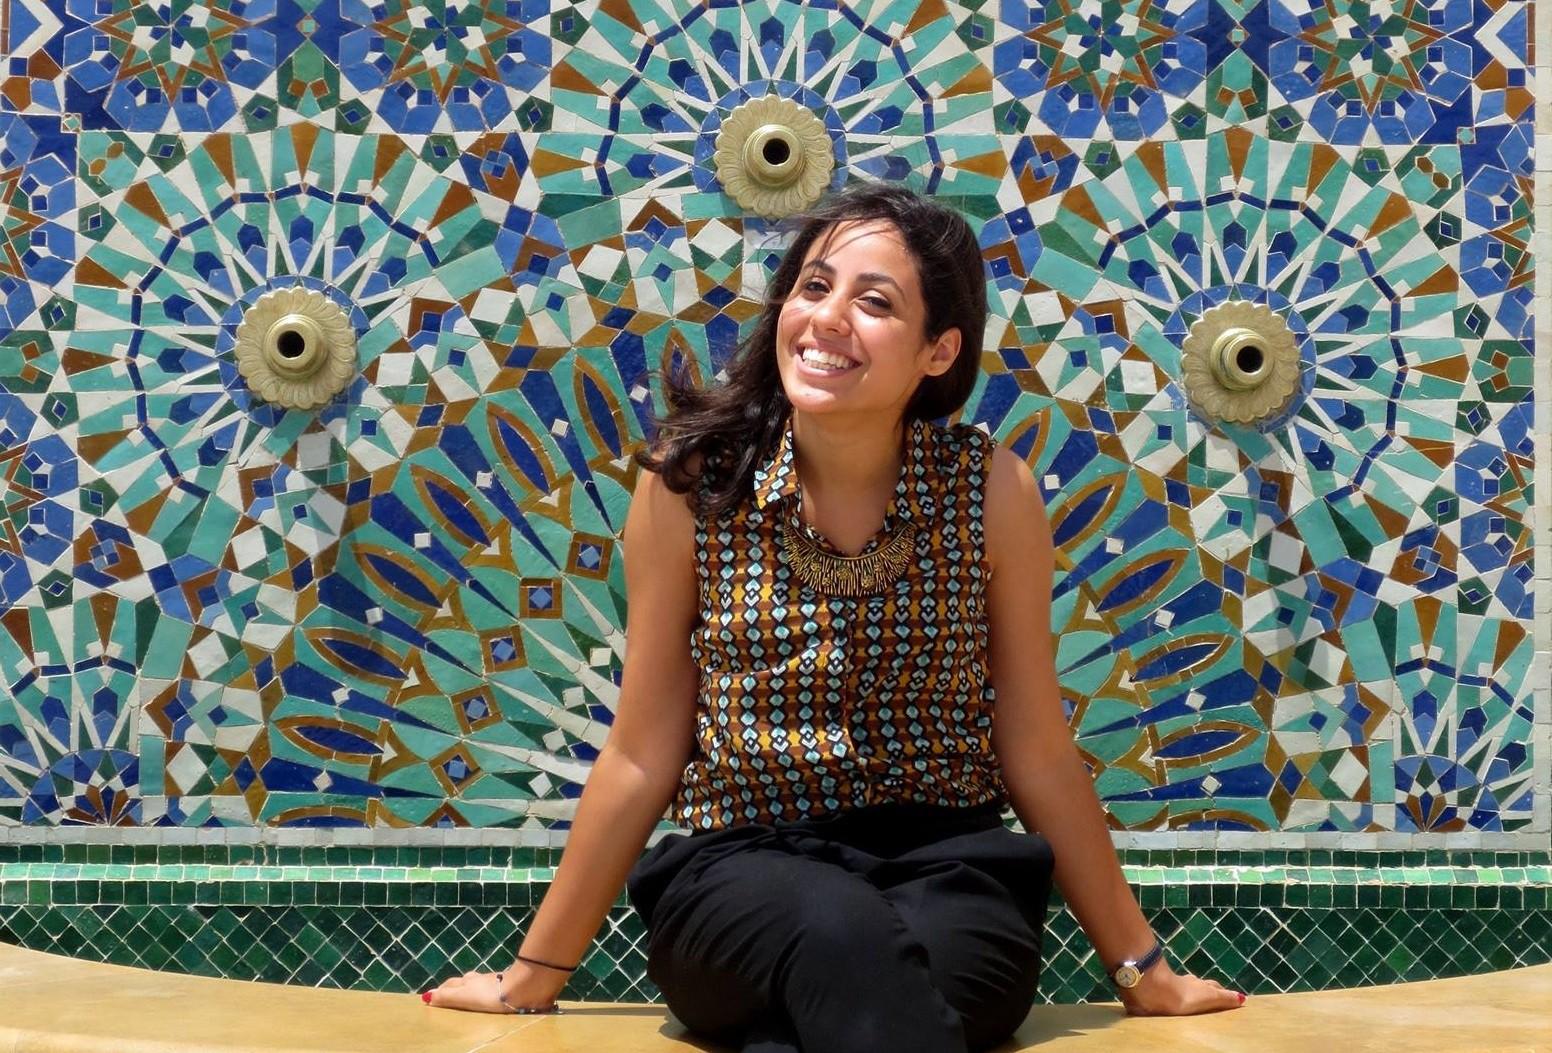 Sarah Zouak is one of the co-founders of Lallab, a new webzine featuring the voices of Muslim women in France.